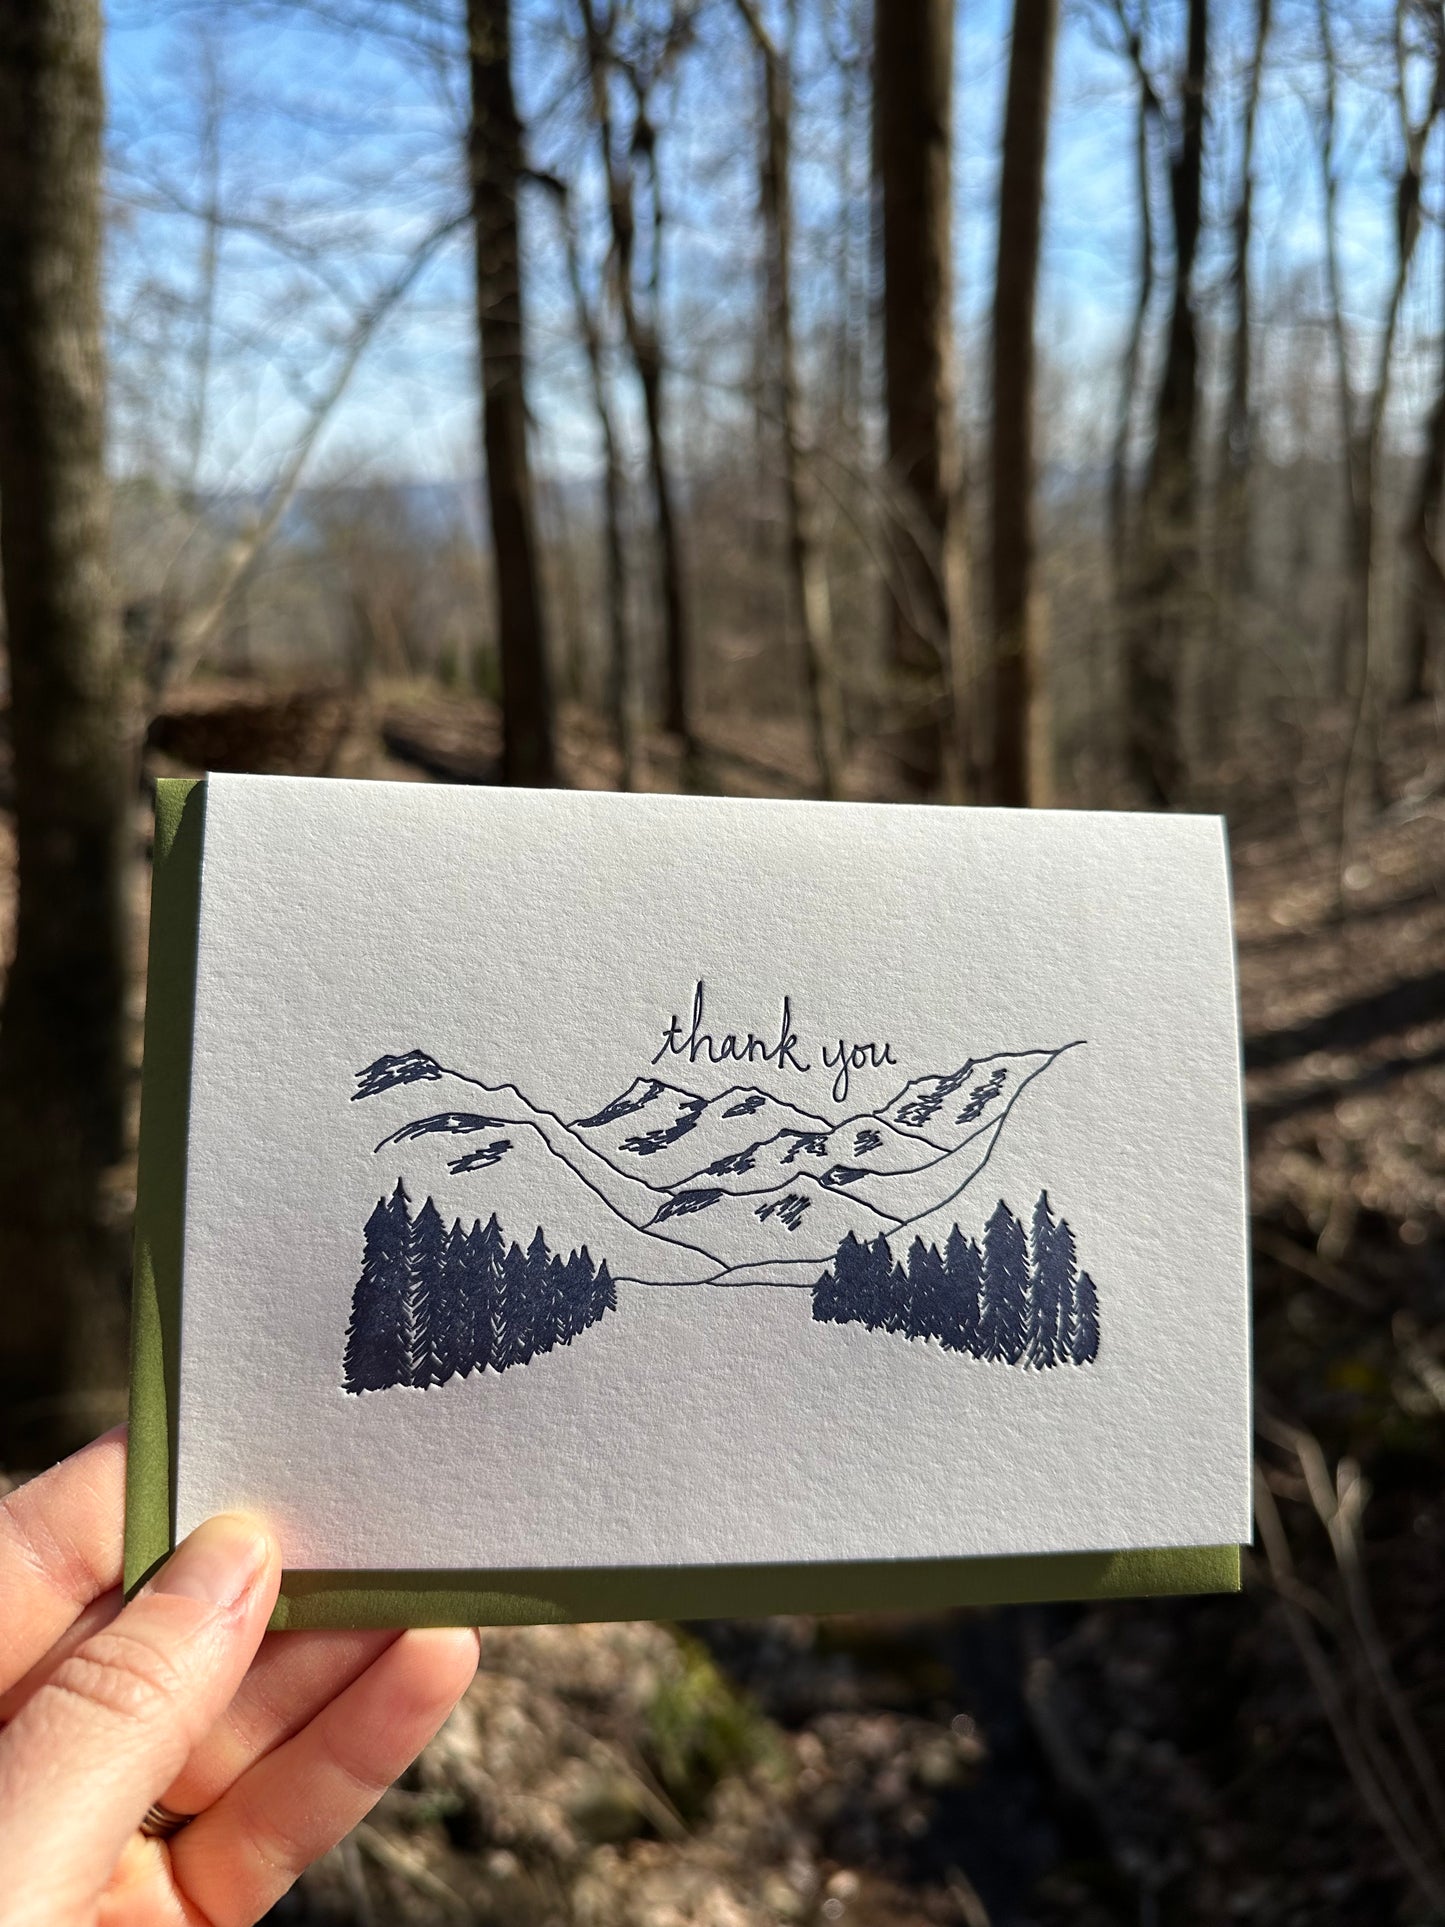 Letterpress greeting card featuring hand-drawn mountain landcape, printed in a rich navy ink. Whimsical hand-drawn text saying "Thank you" is shown above the moutains, in the same navy ink. The card is white, blank inside, and is paired with a rich green envelope. The card is shown outside on a sunny day in winter. 